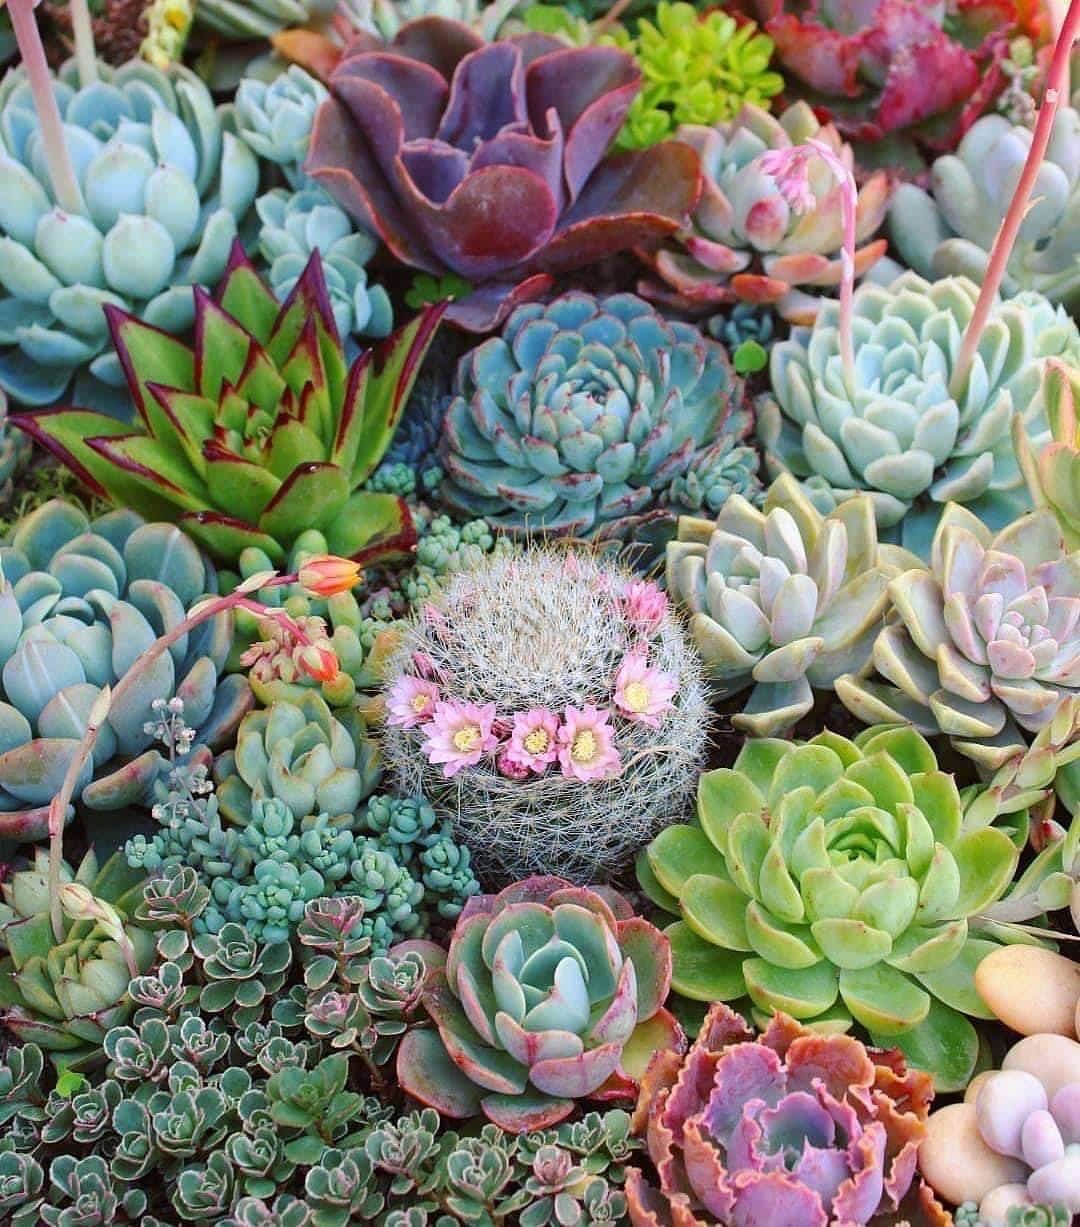 How To Grow And Care For Succulents In Outdoor Space